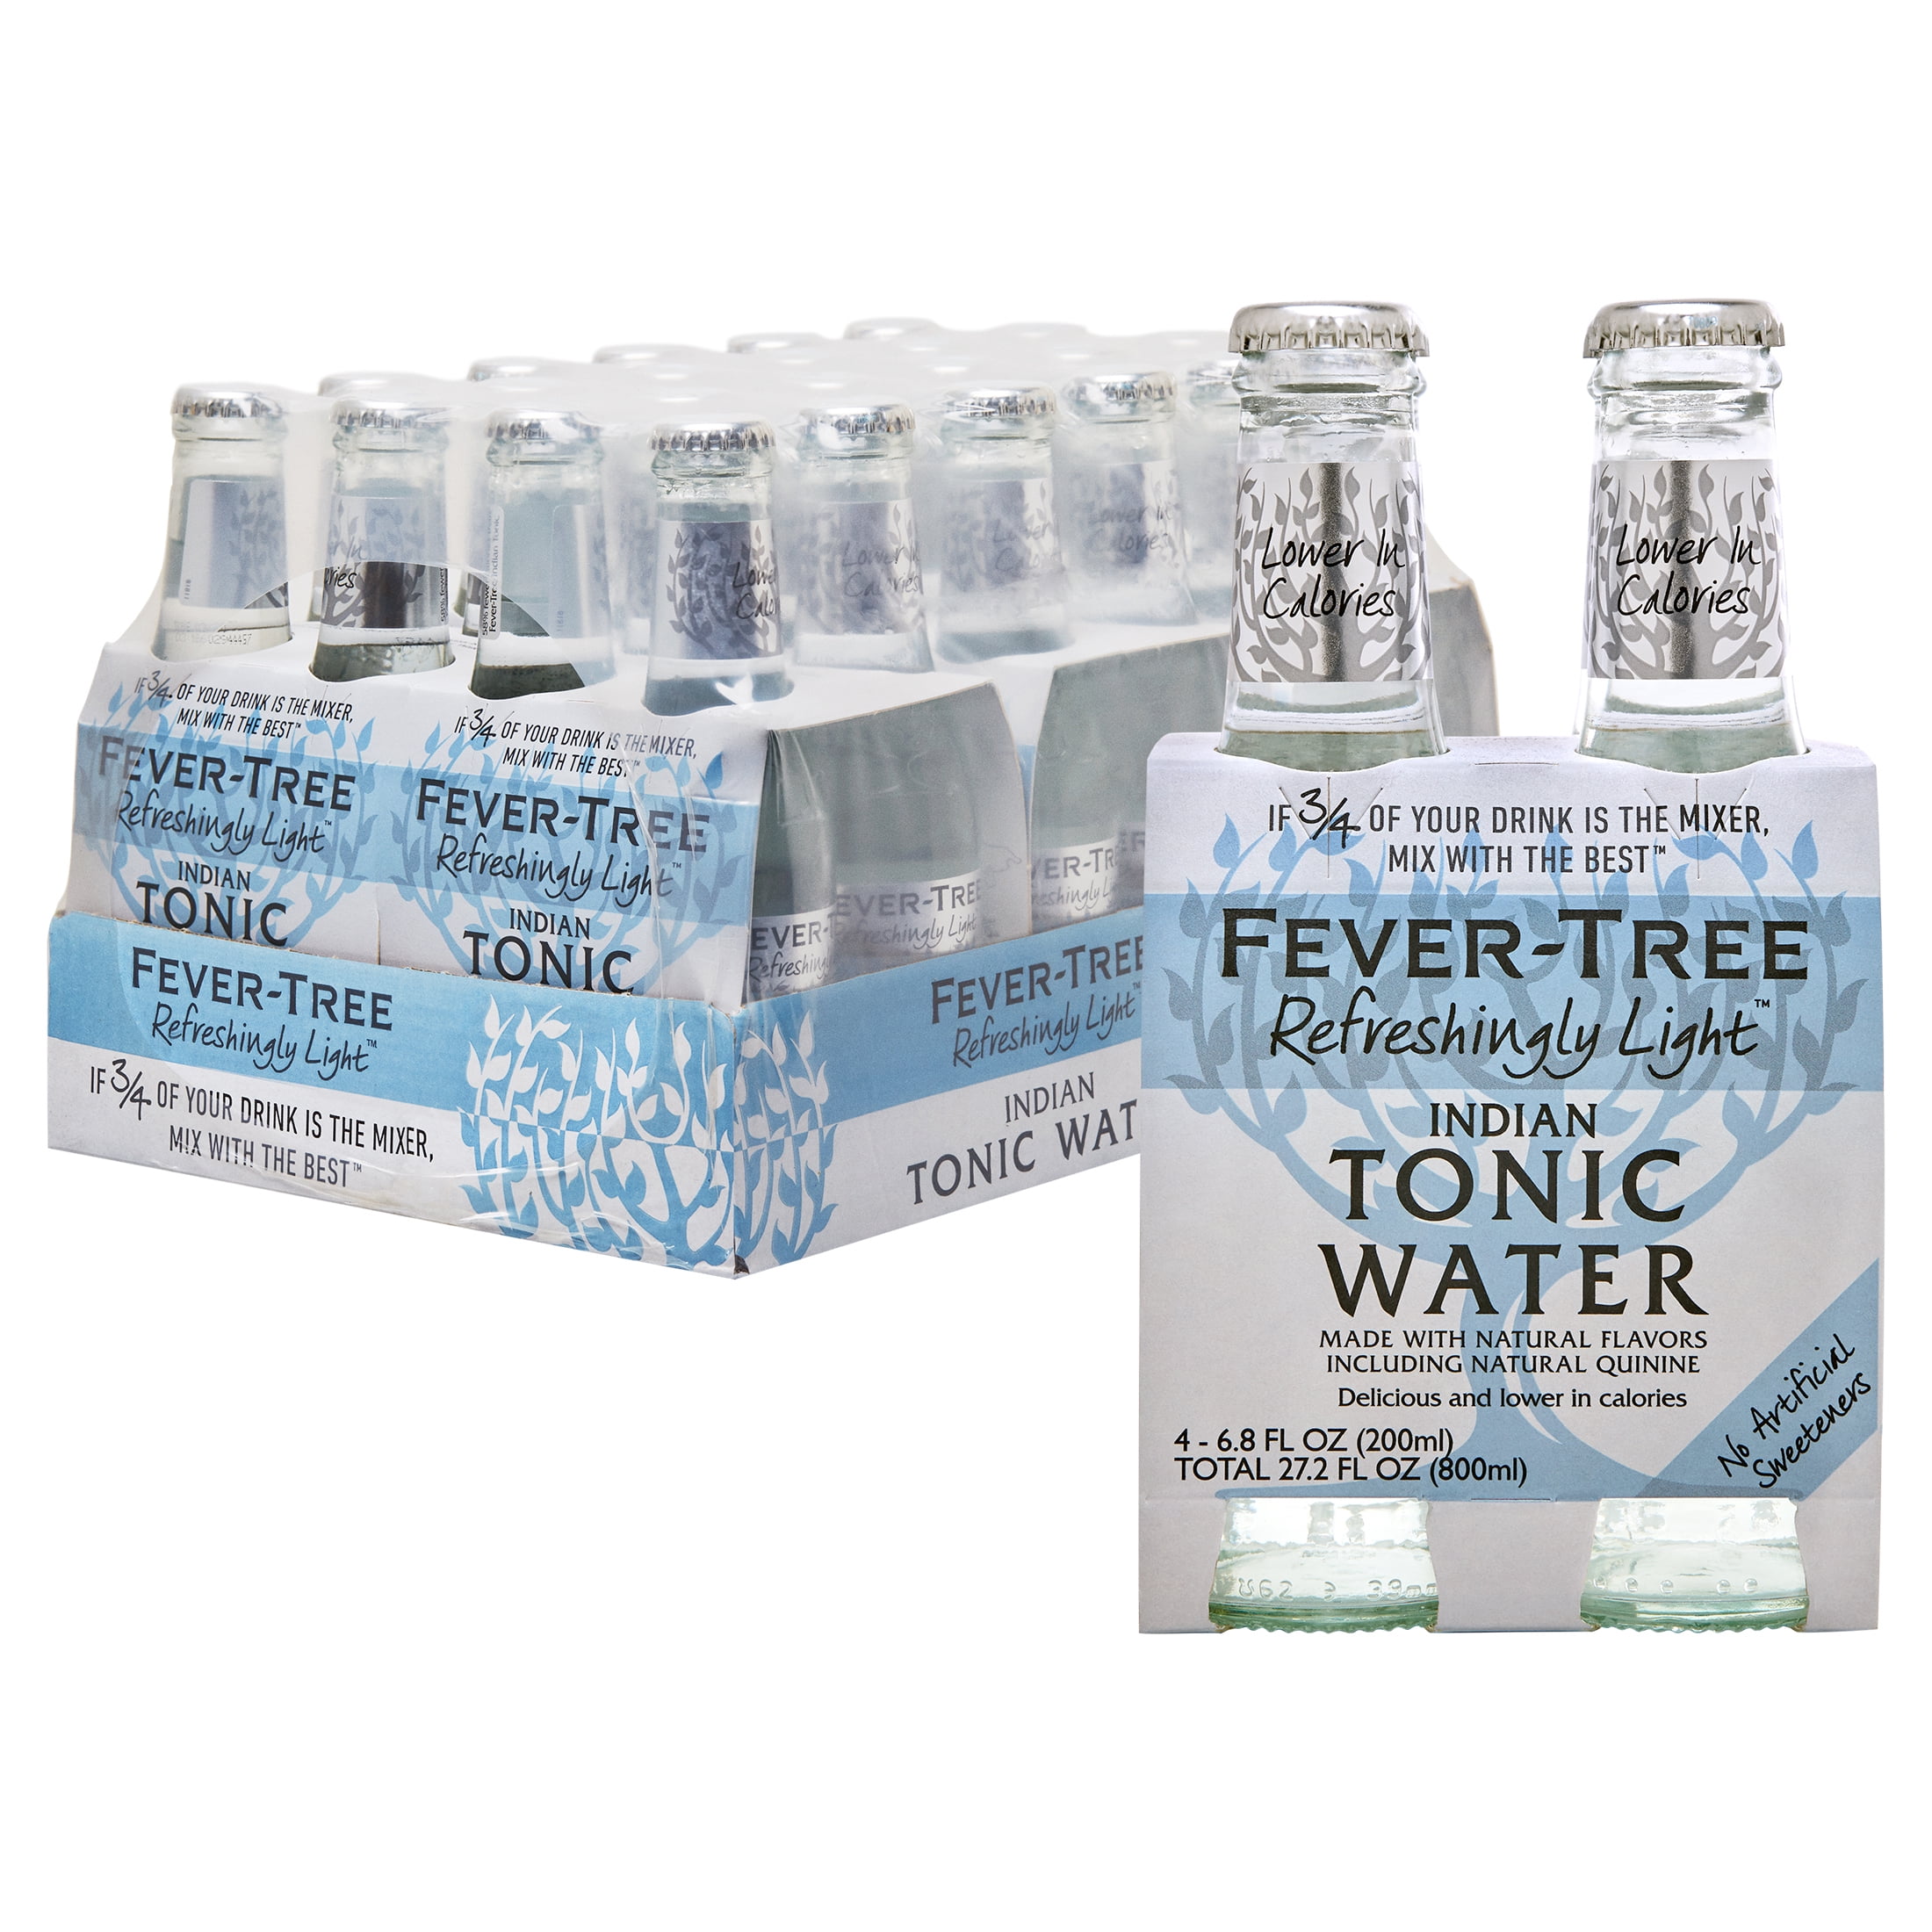 Fever-Tree Naturally Light Tonic Water Made with Natural 6.8 Fl. Oz., 24 Count - Walmart.com